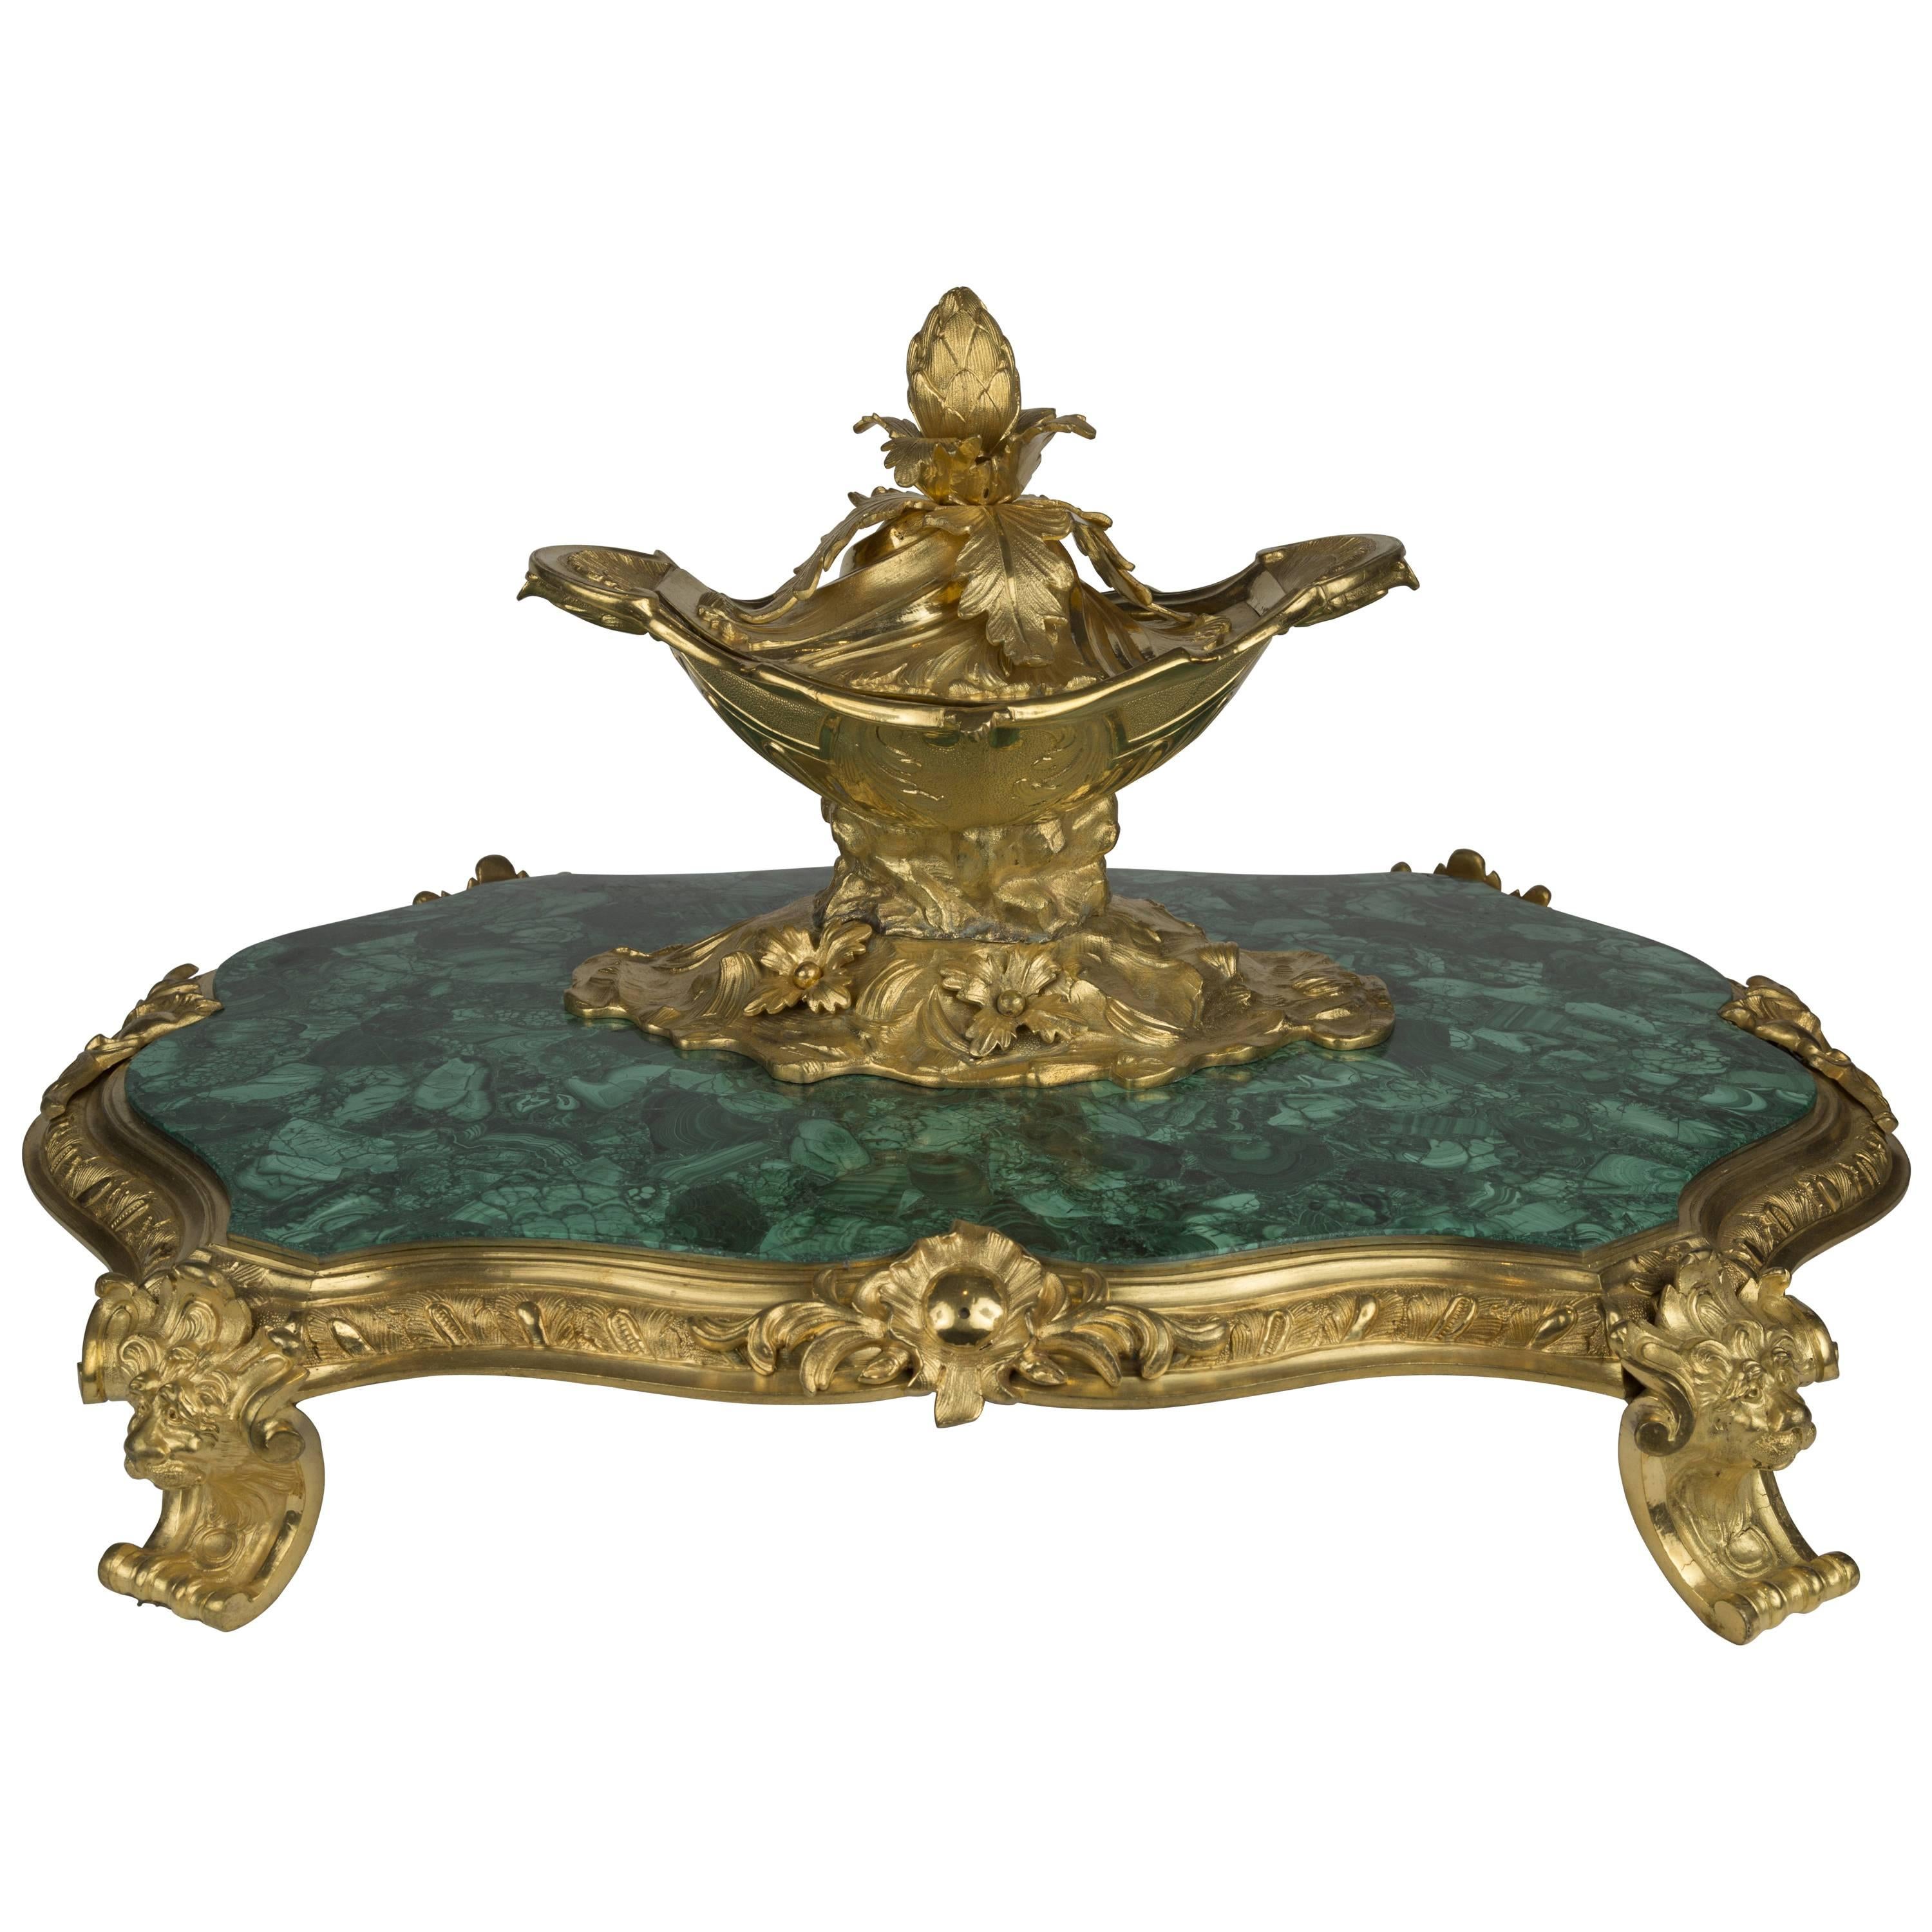 19th Century Large Malachite and Ormolu-Mounted Centerpiece For Sale